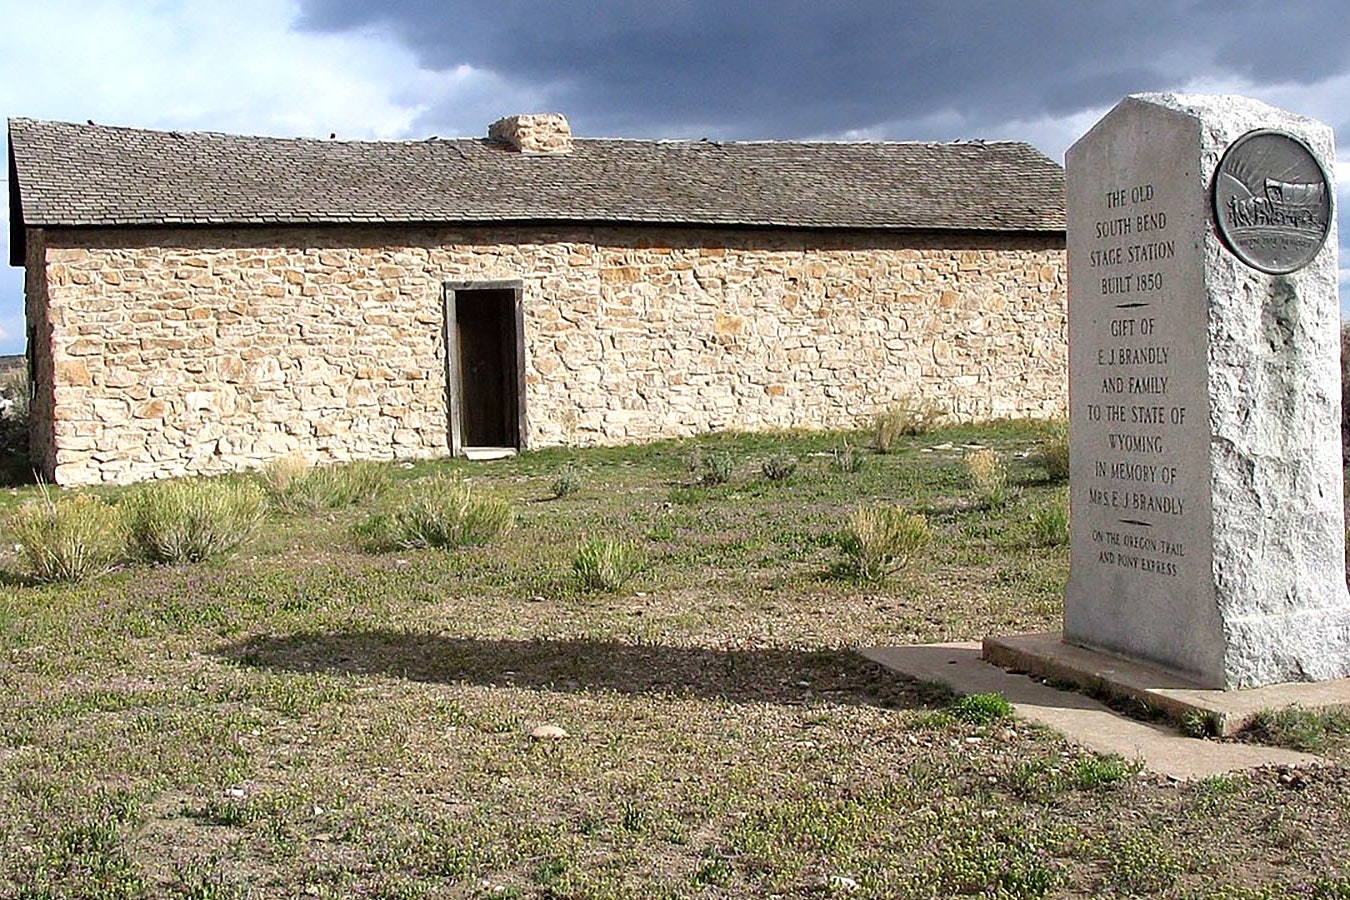 This stone marker shows the Granger Stage Station, first known as the Old South Bend Stage Station built in 1850, was on the Oregon Trail and a Pony Express stop.